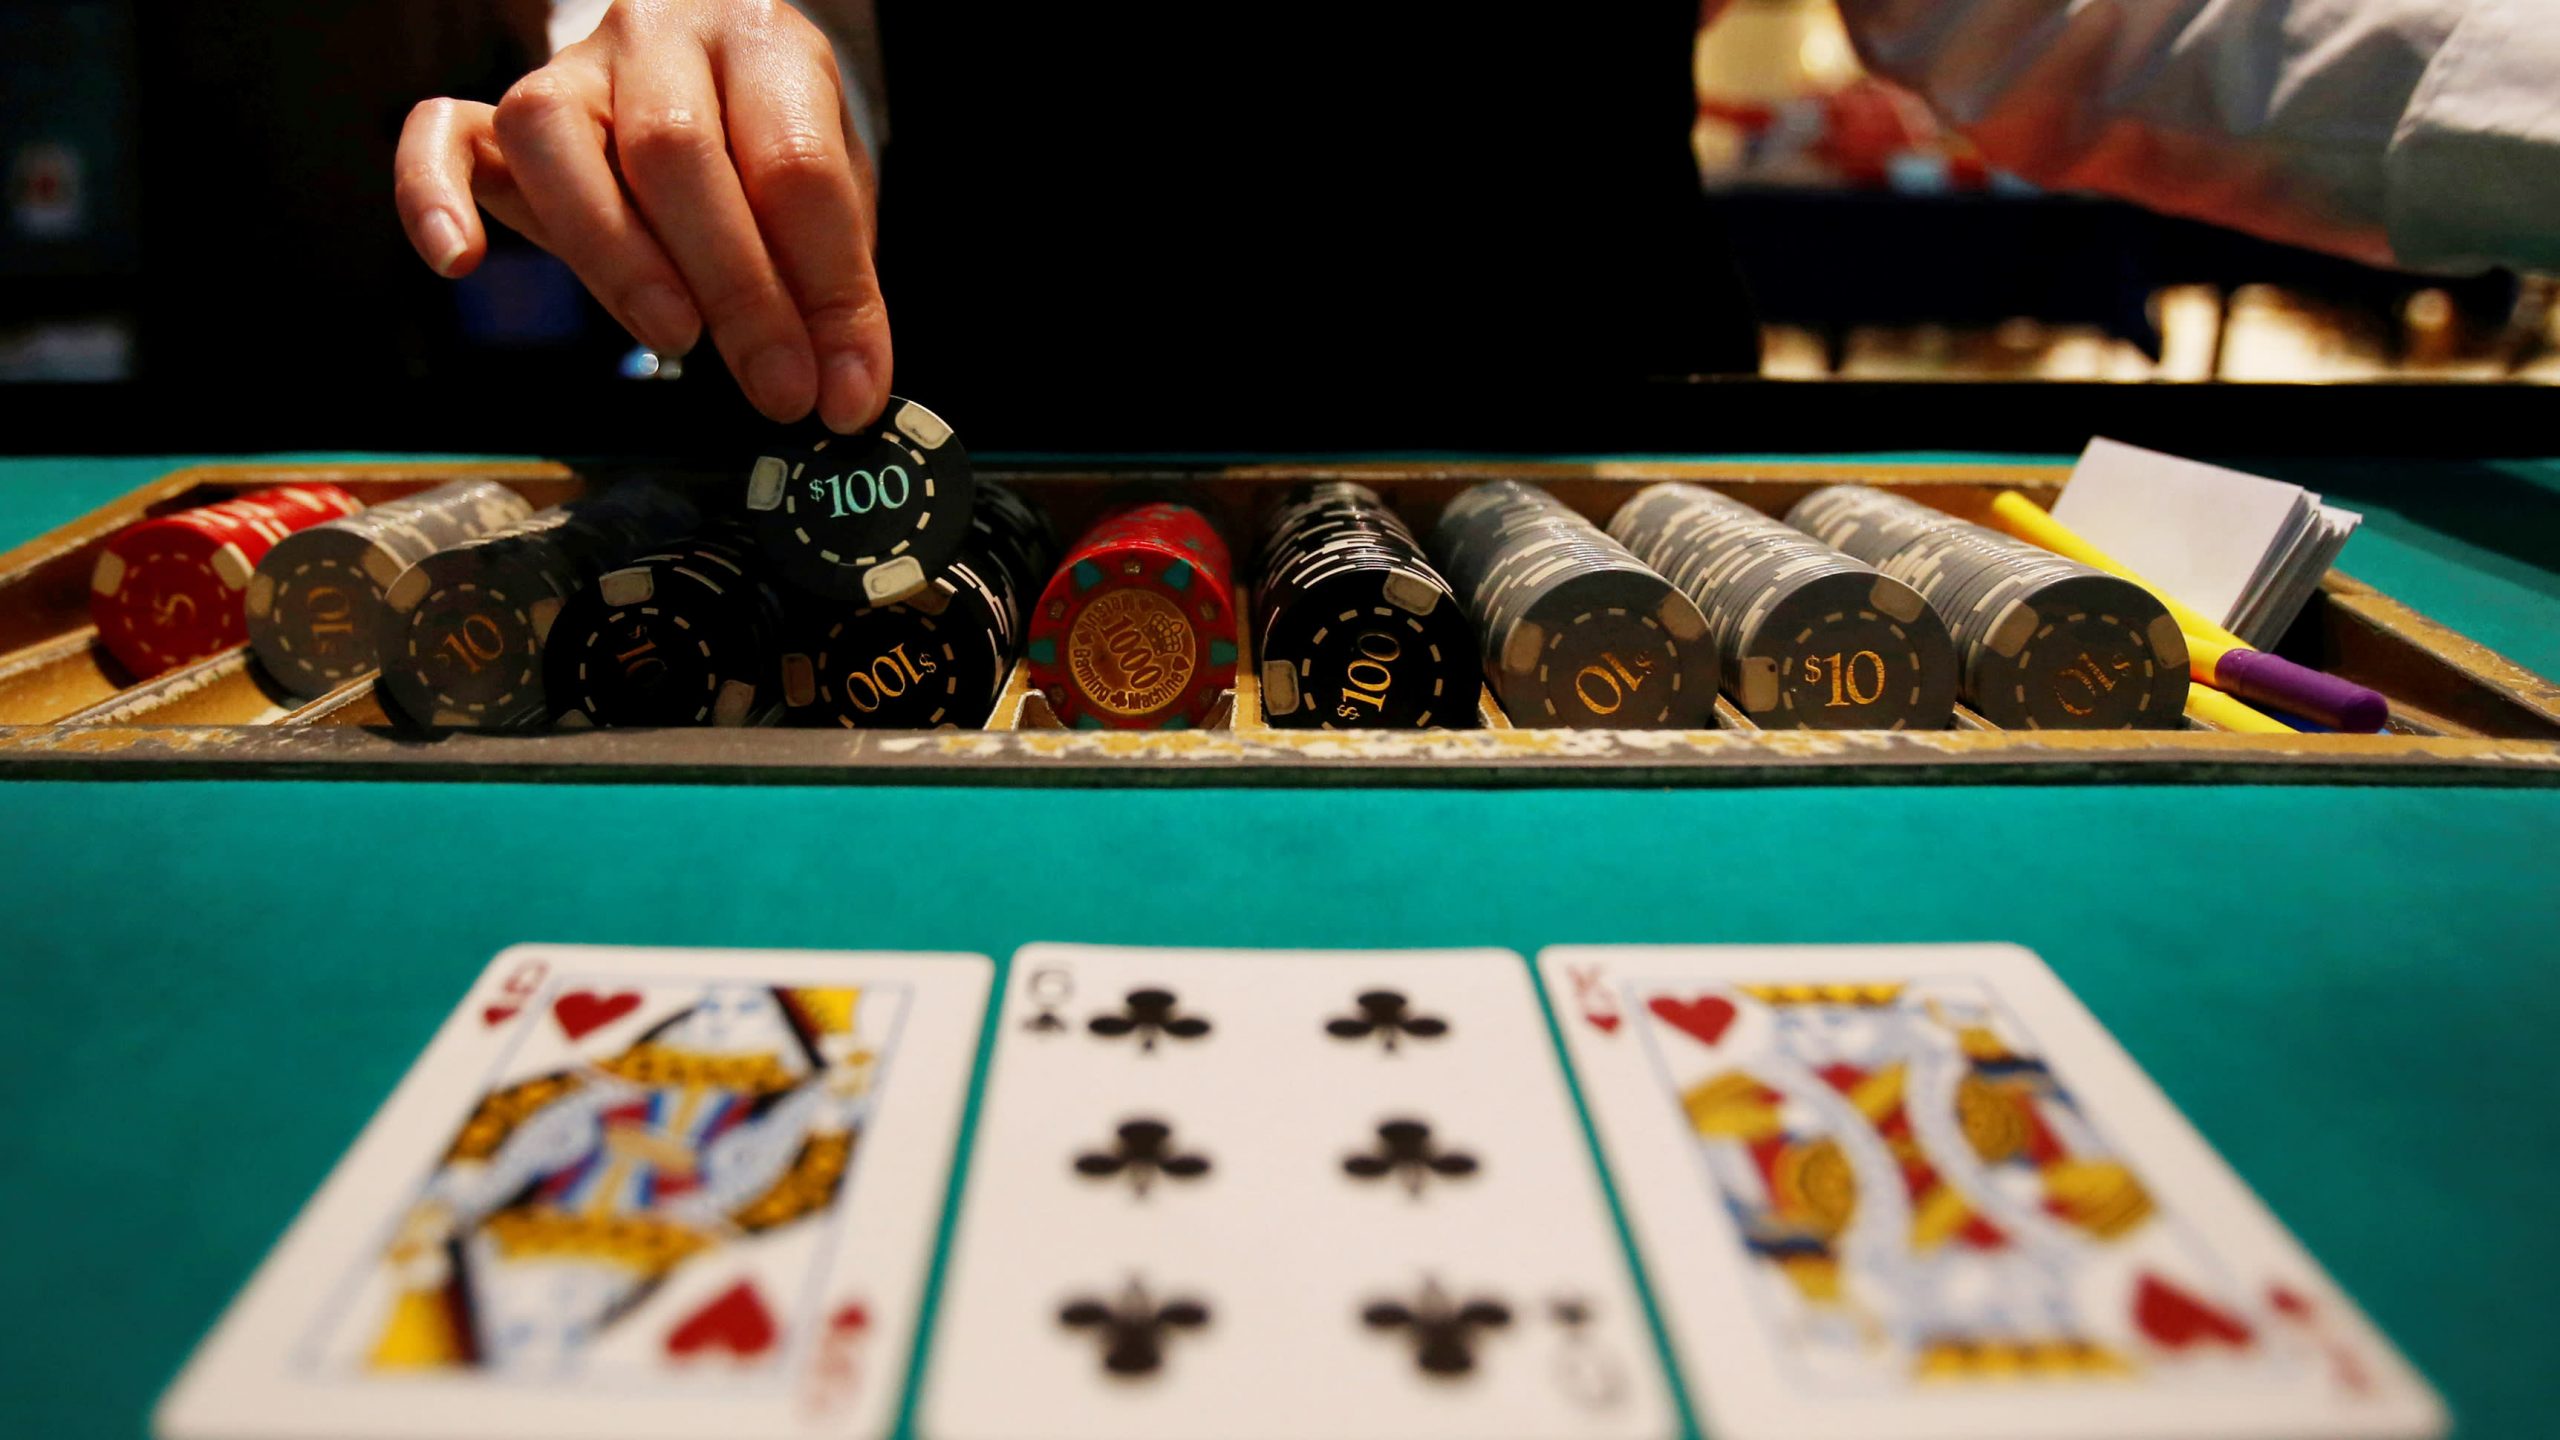 Arizona Wants to Add New Verticals to Its Gambling Industry